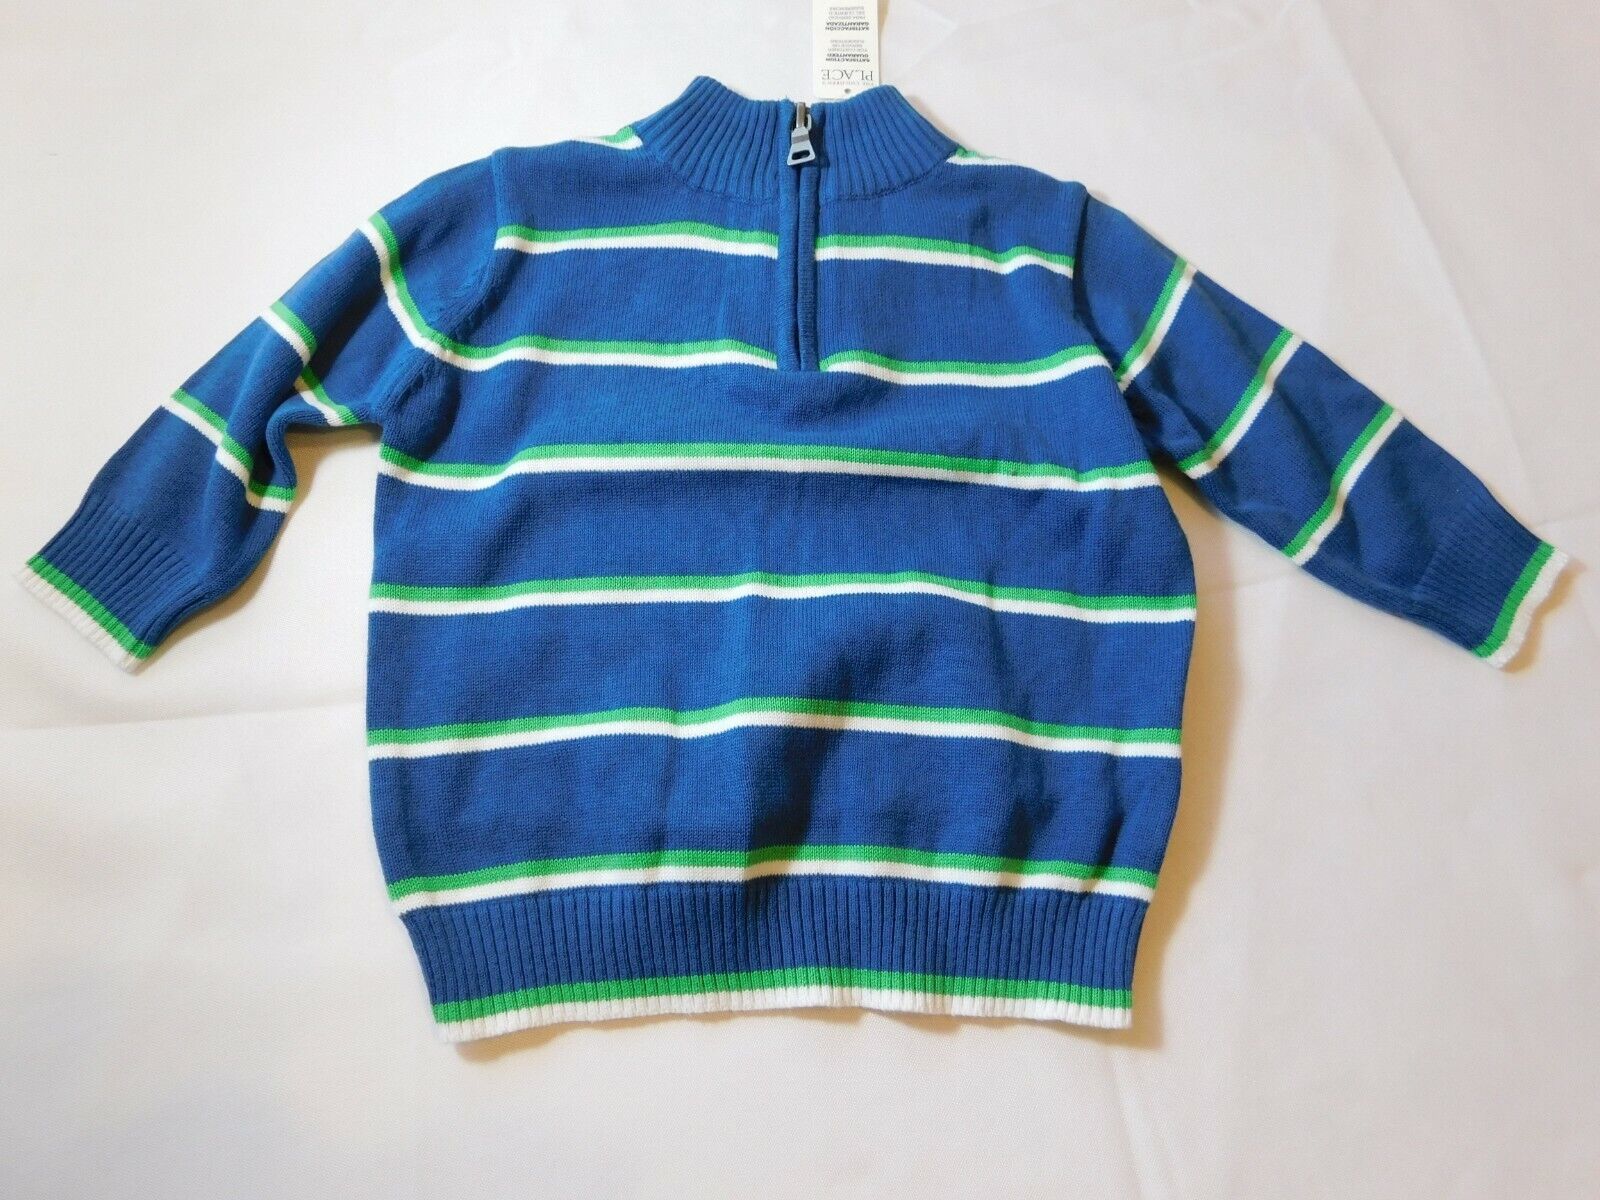 The Children's Place Baby Boy's Long Sleeve Sweater blue striped Size 6-9 Months - $15.59